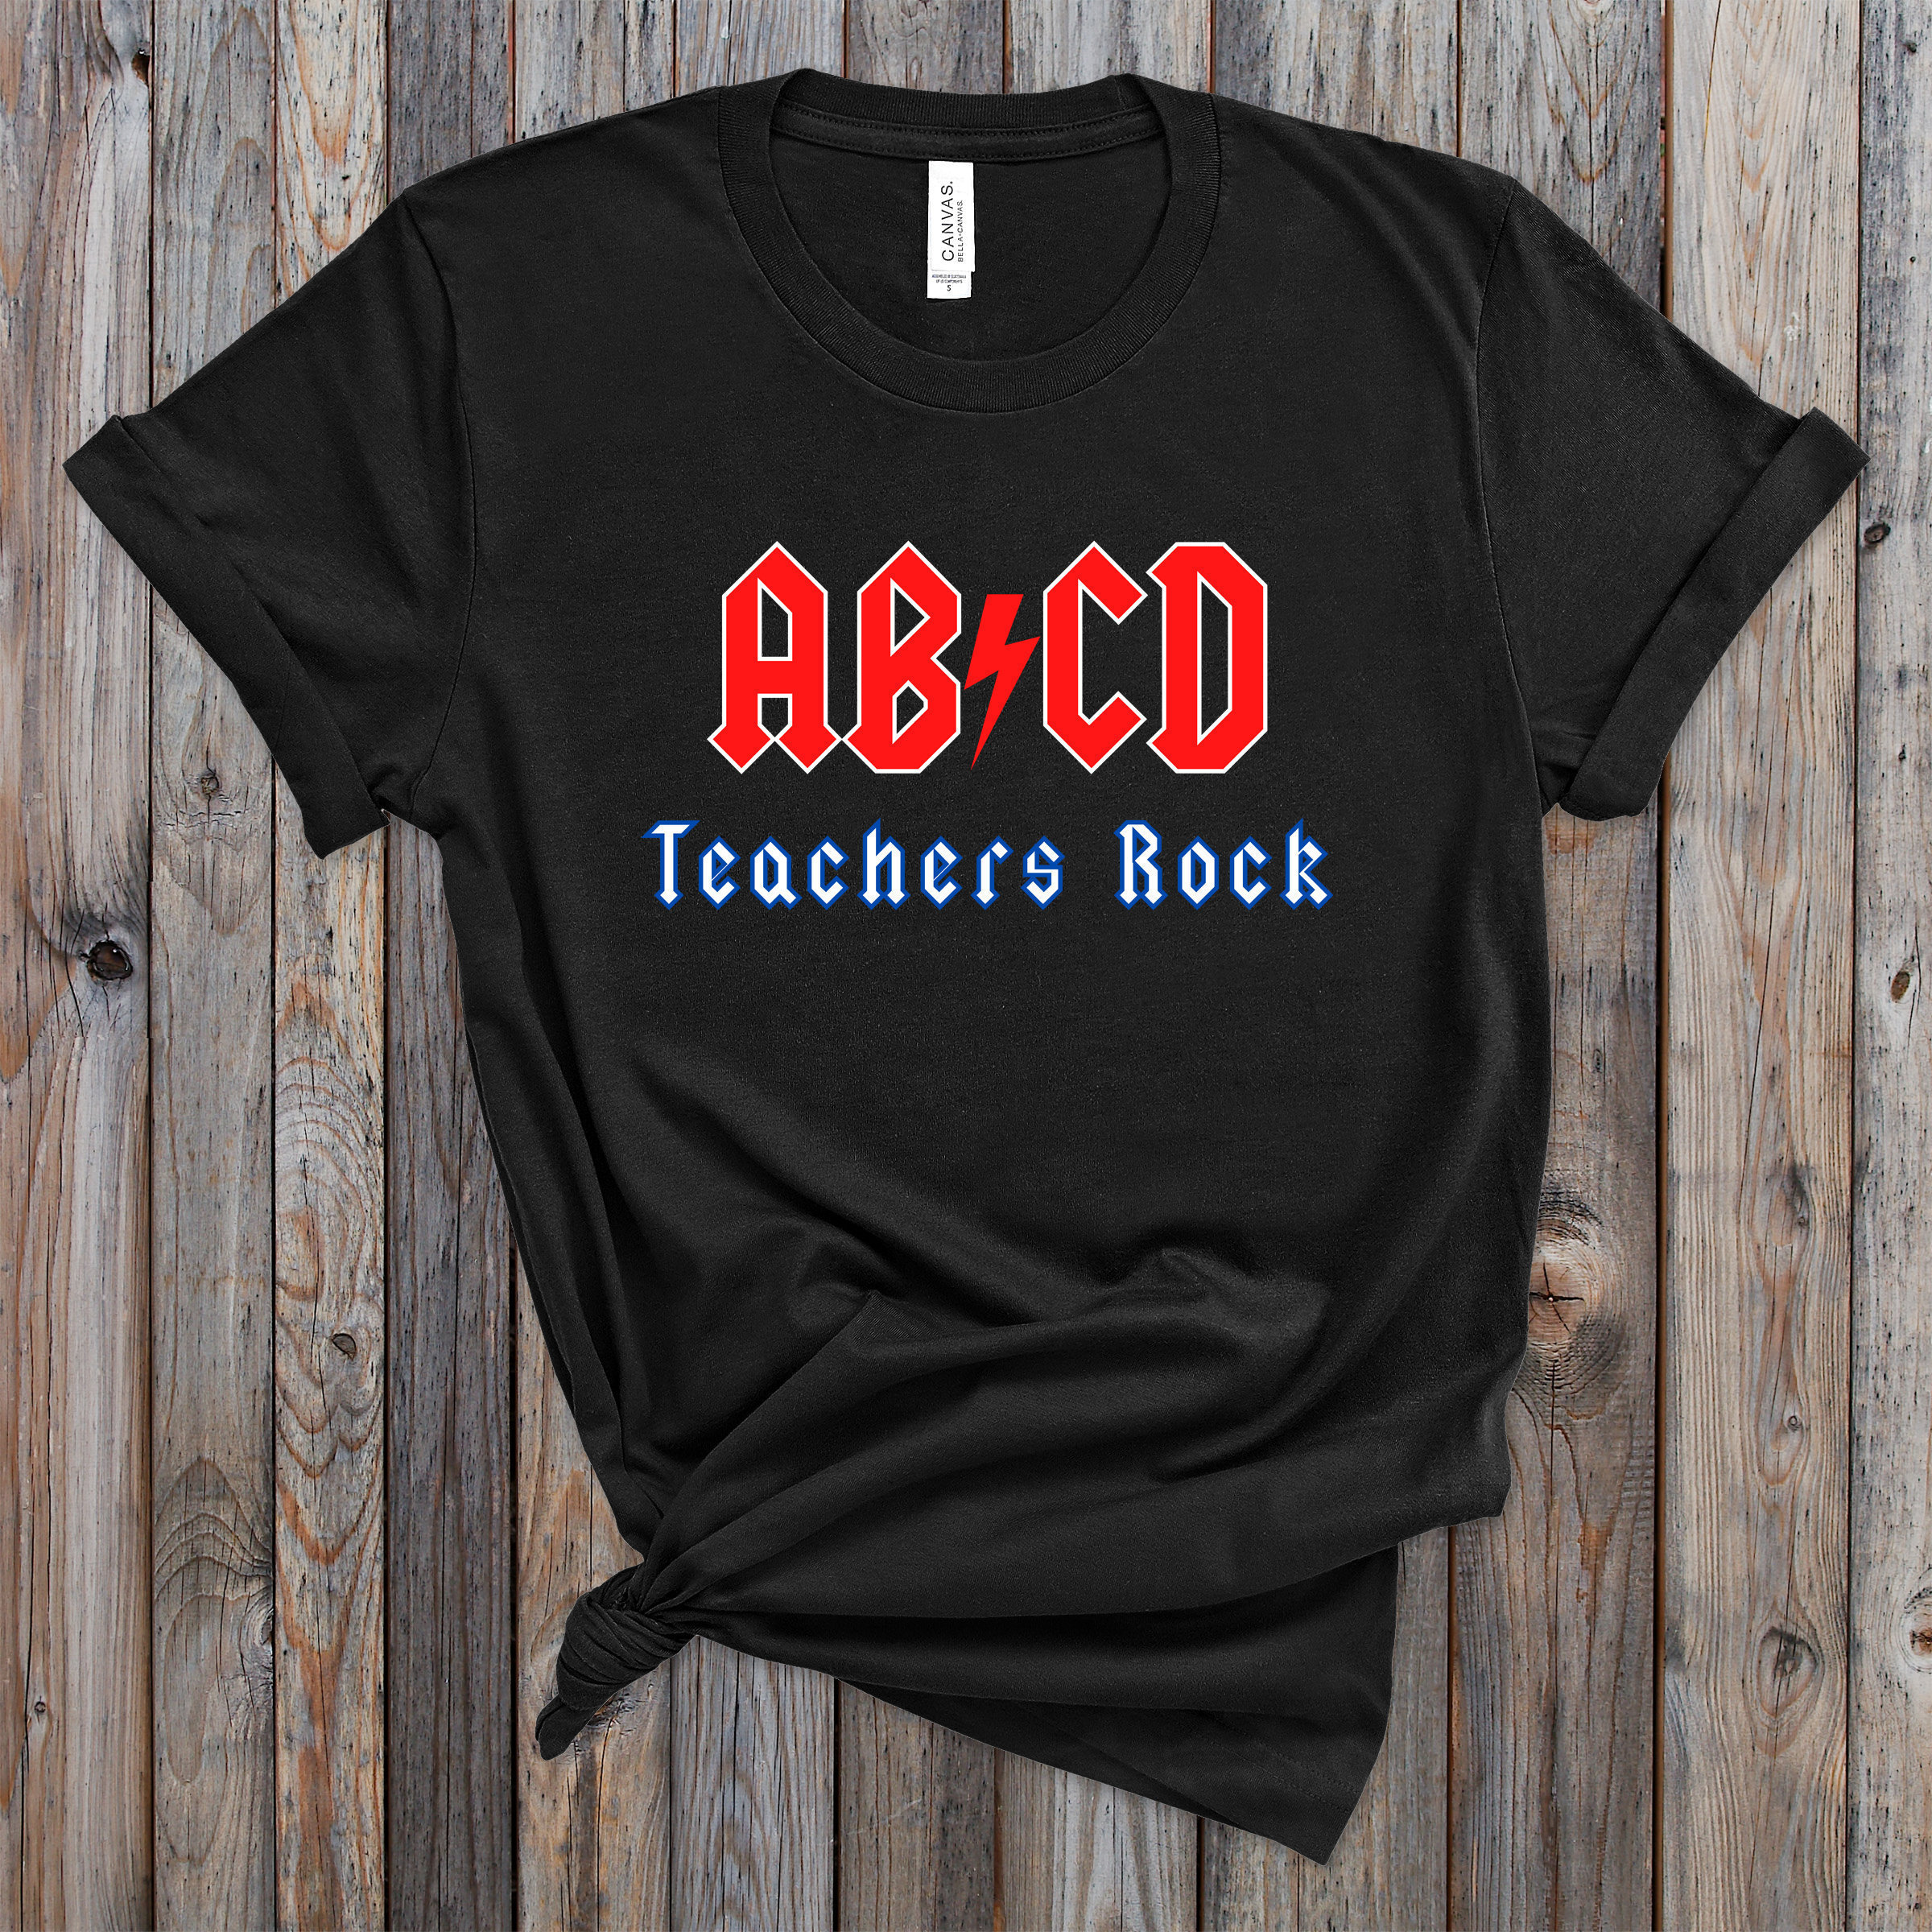 Etsy Ac Acdc - Dc Abcd